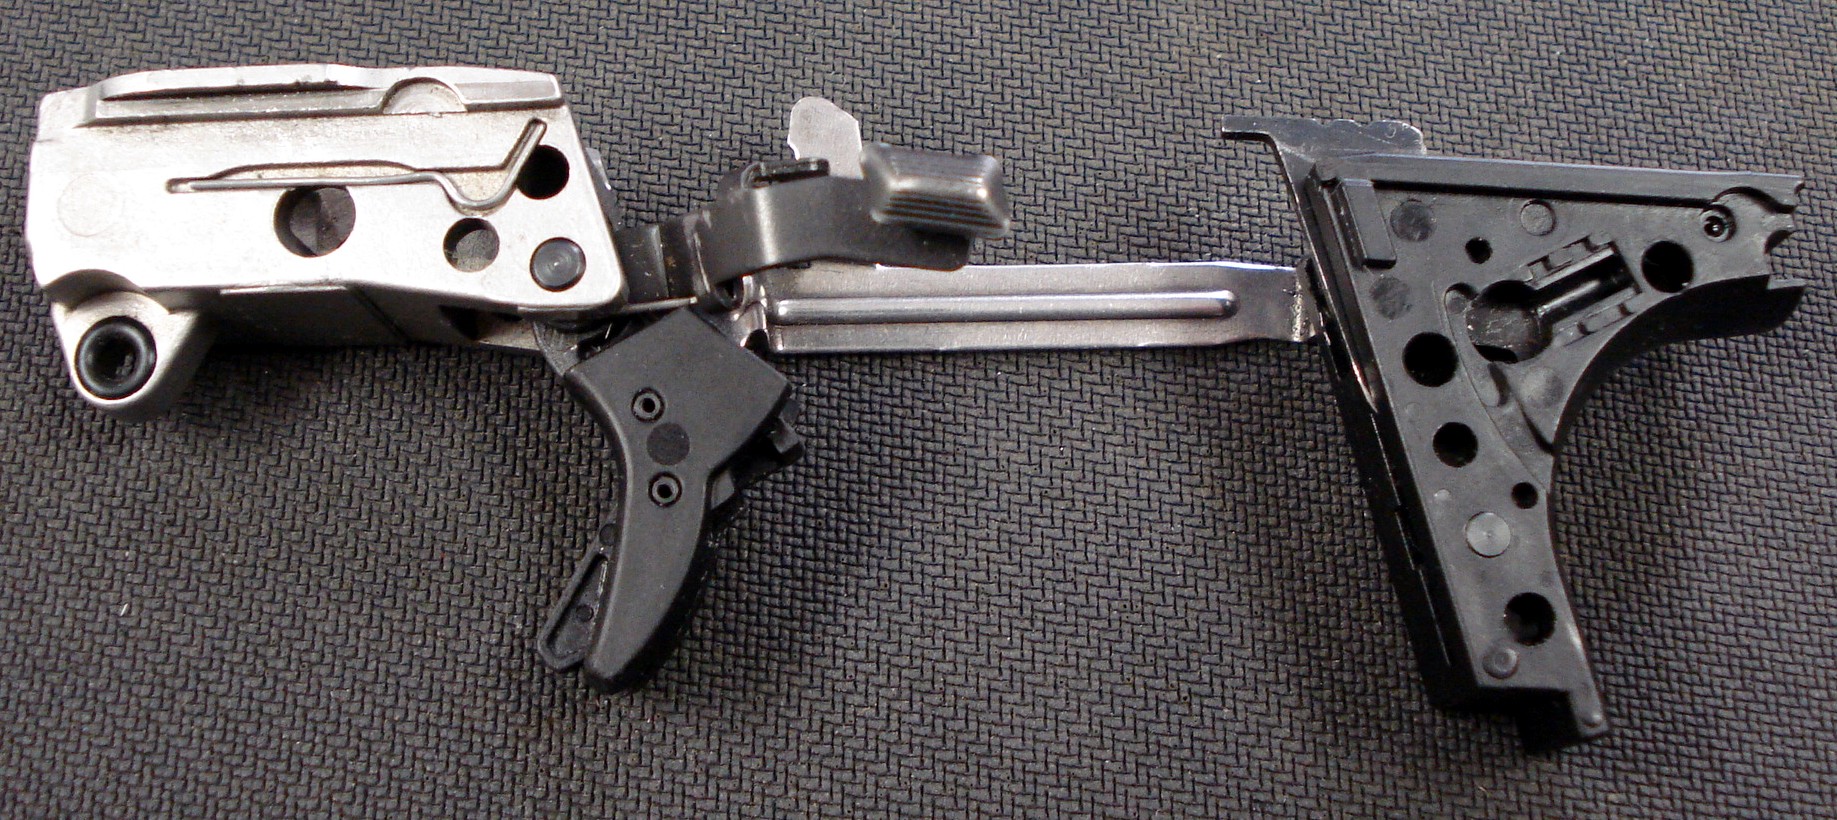 left-view-trigger-group-without-safety-assembly.jpg